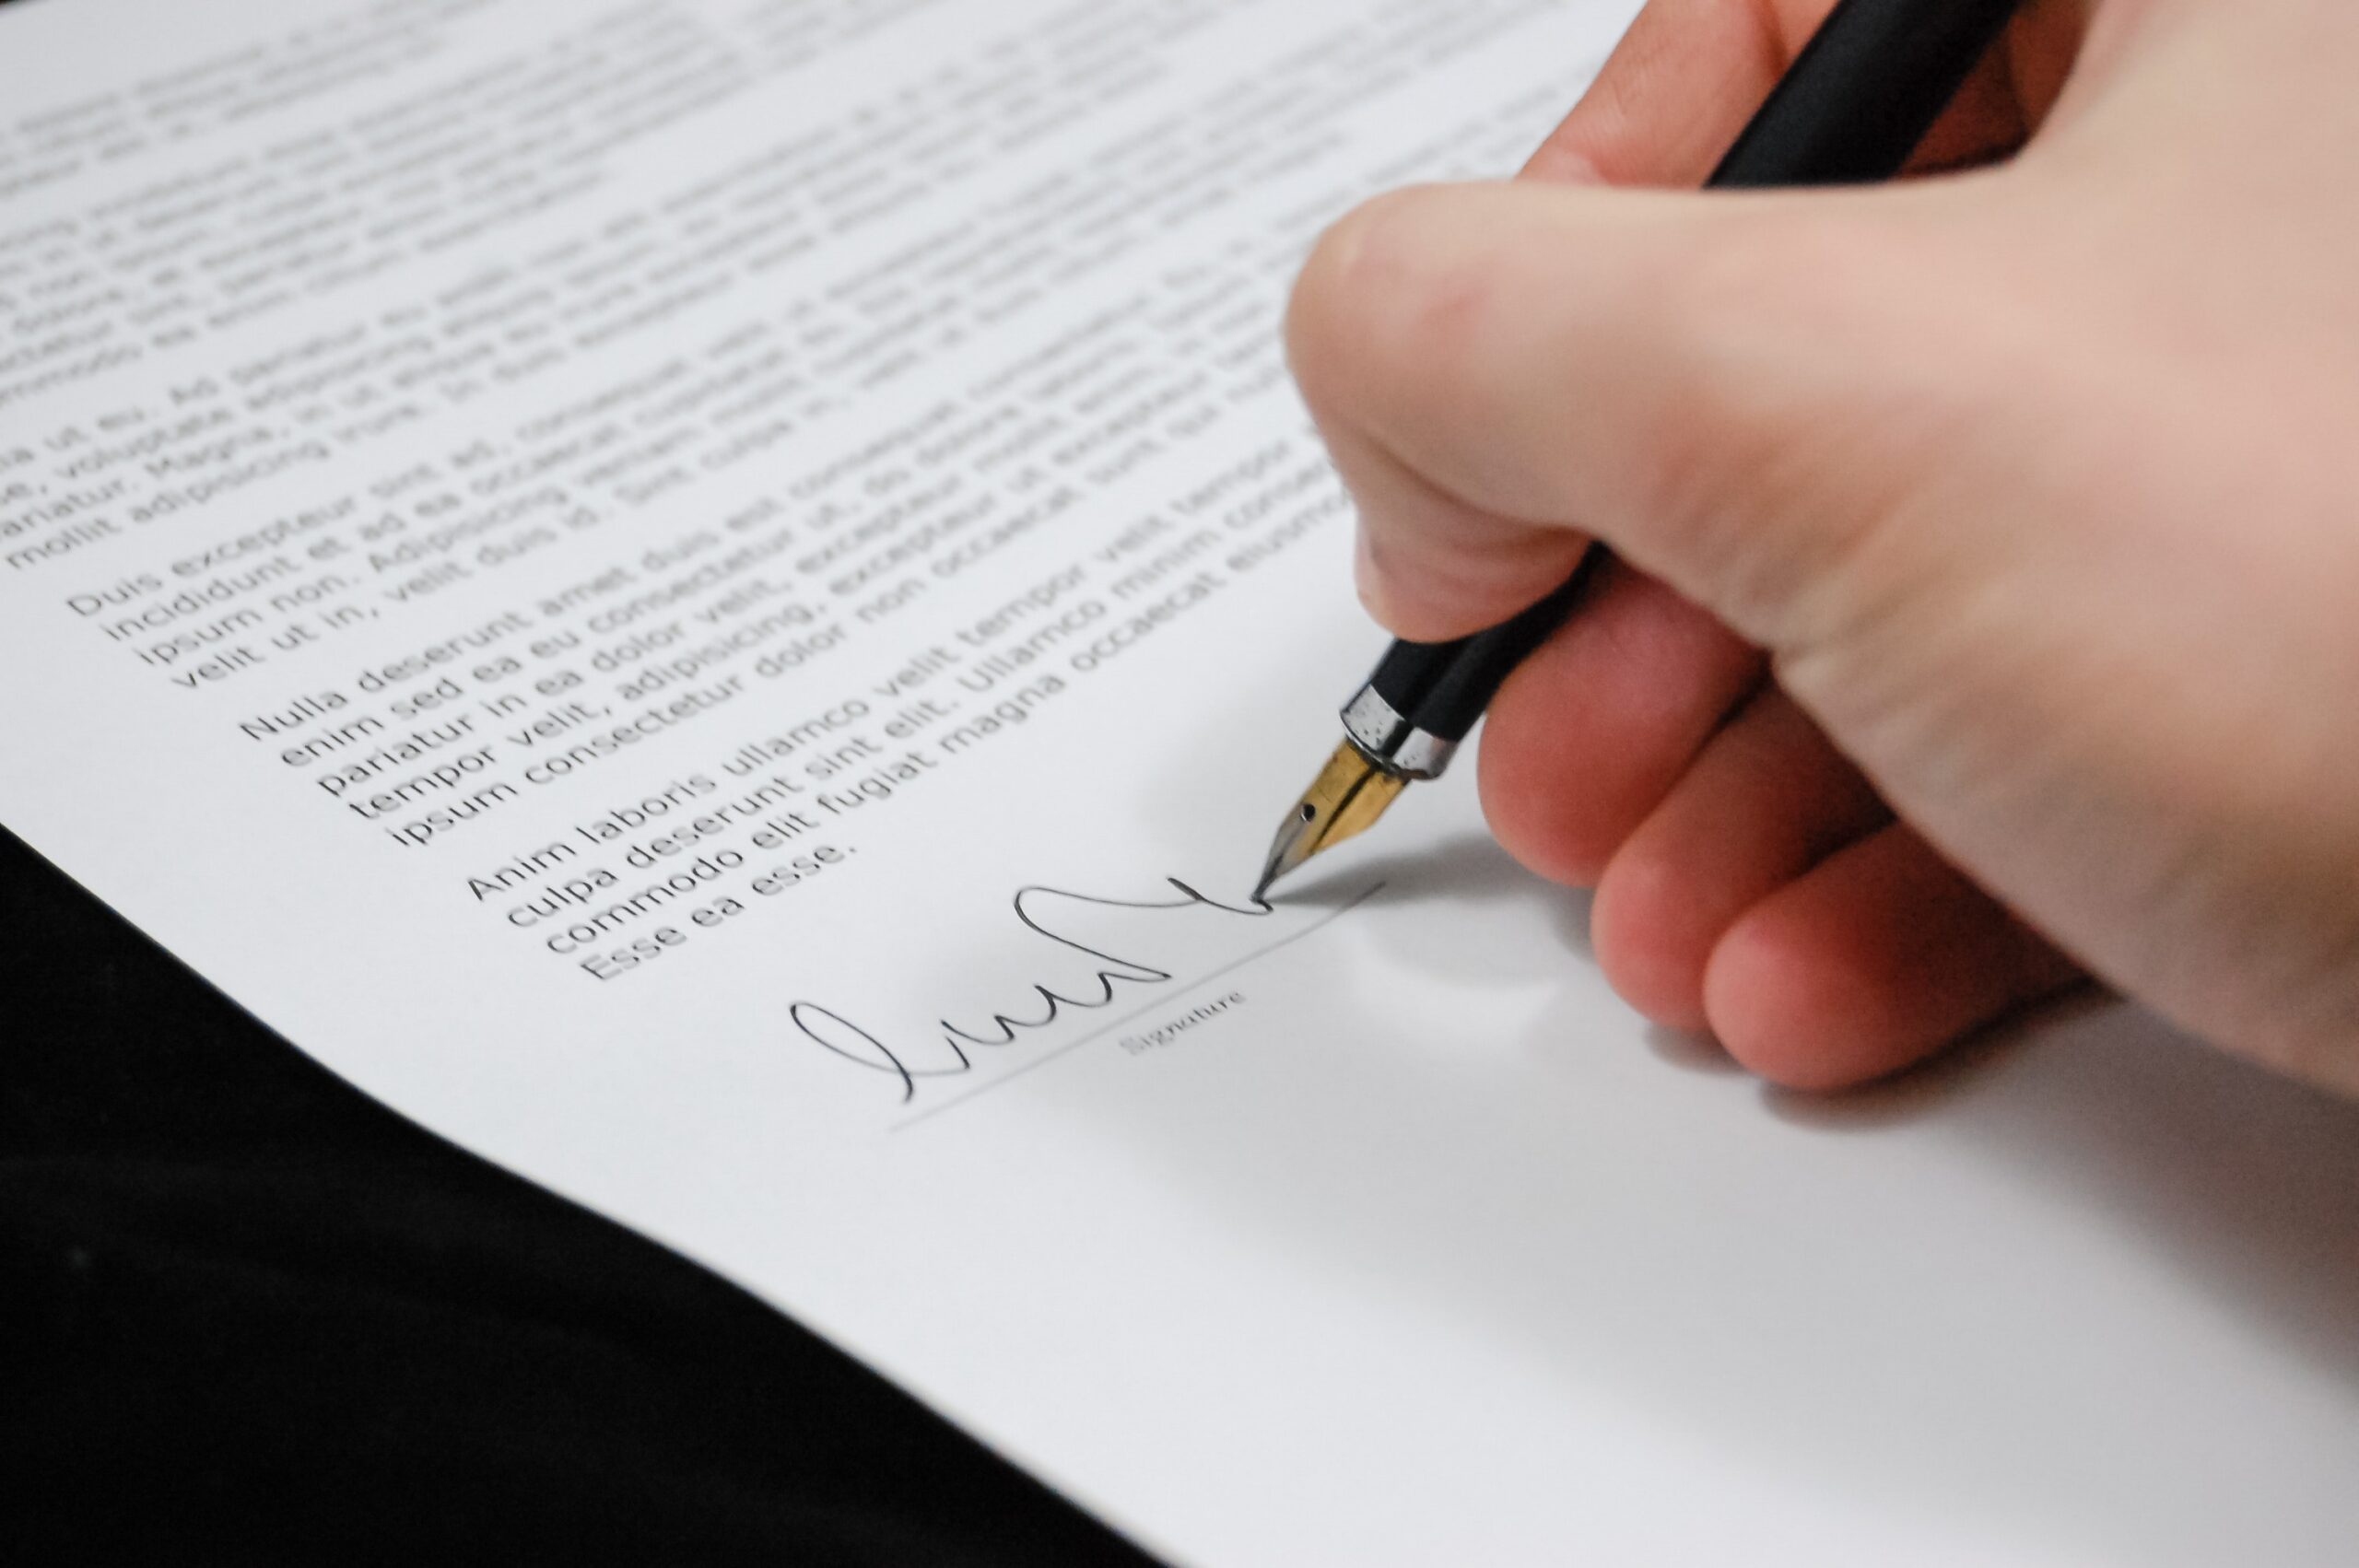 Creating Enforceable Contracts in Difficult Times